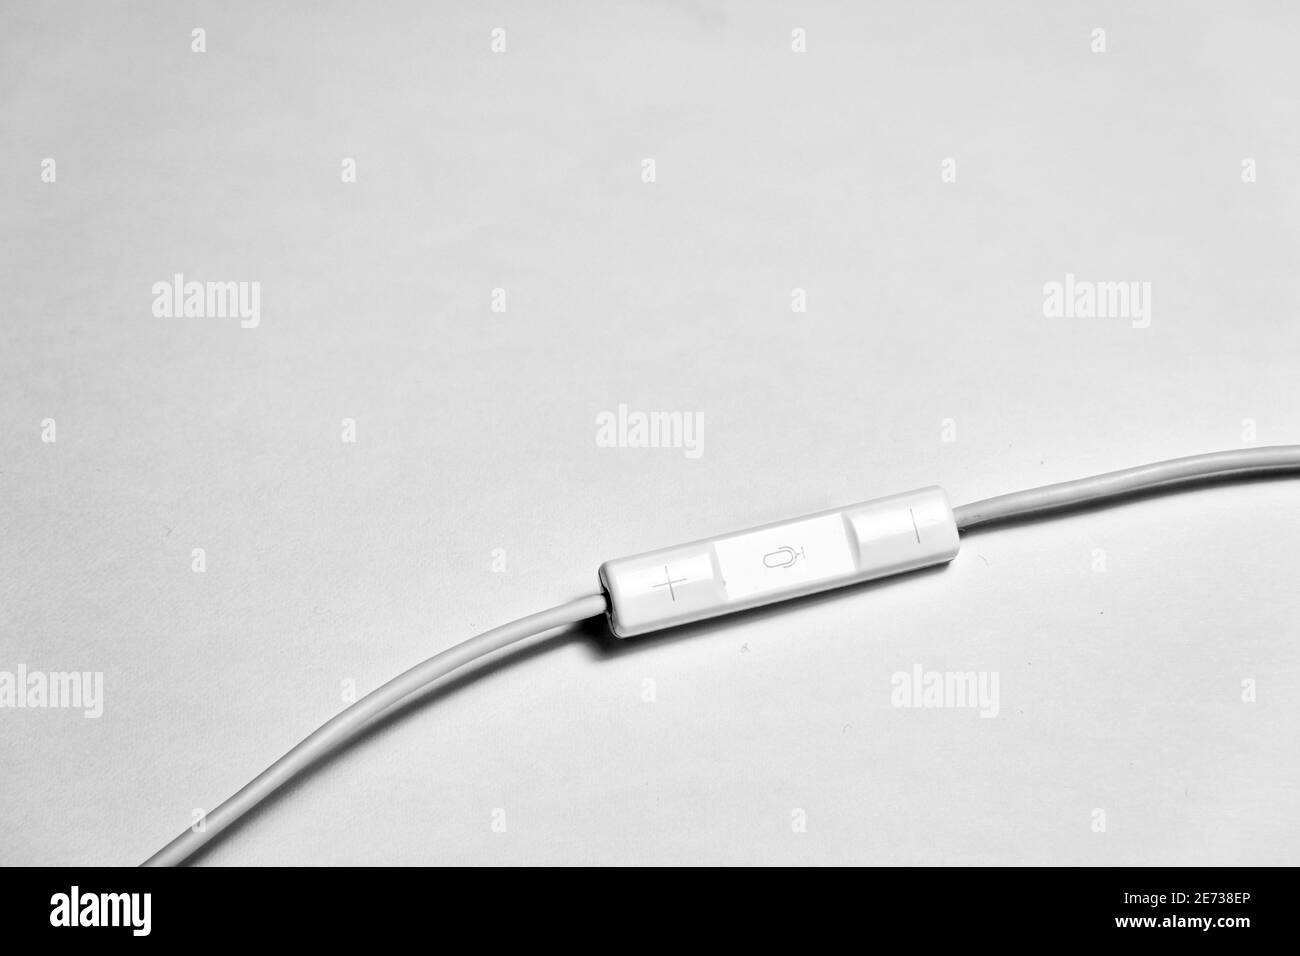 White earpiece controller for volume increasing and decreasing with isolated white background and its white electric cable. Stock Photo